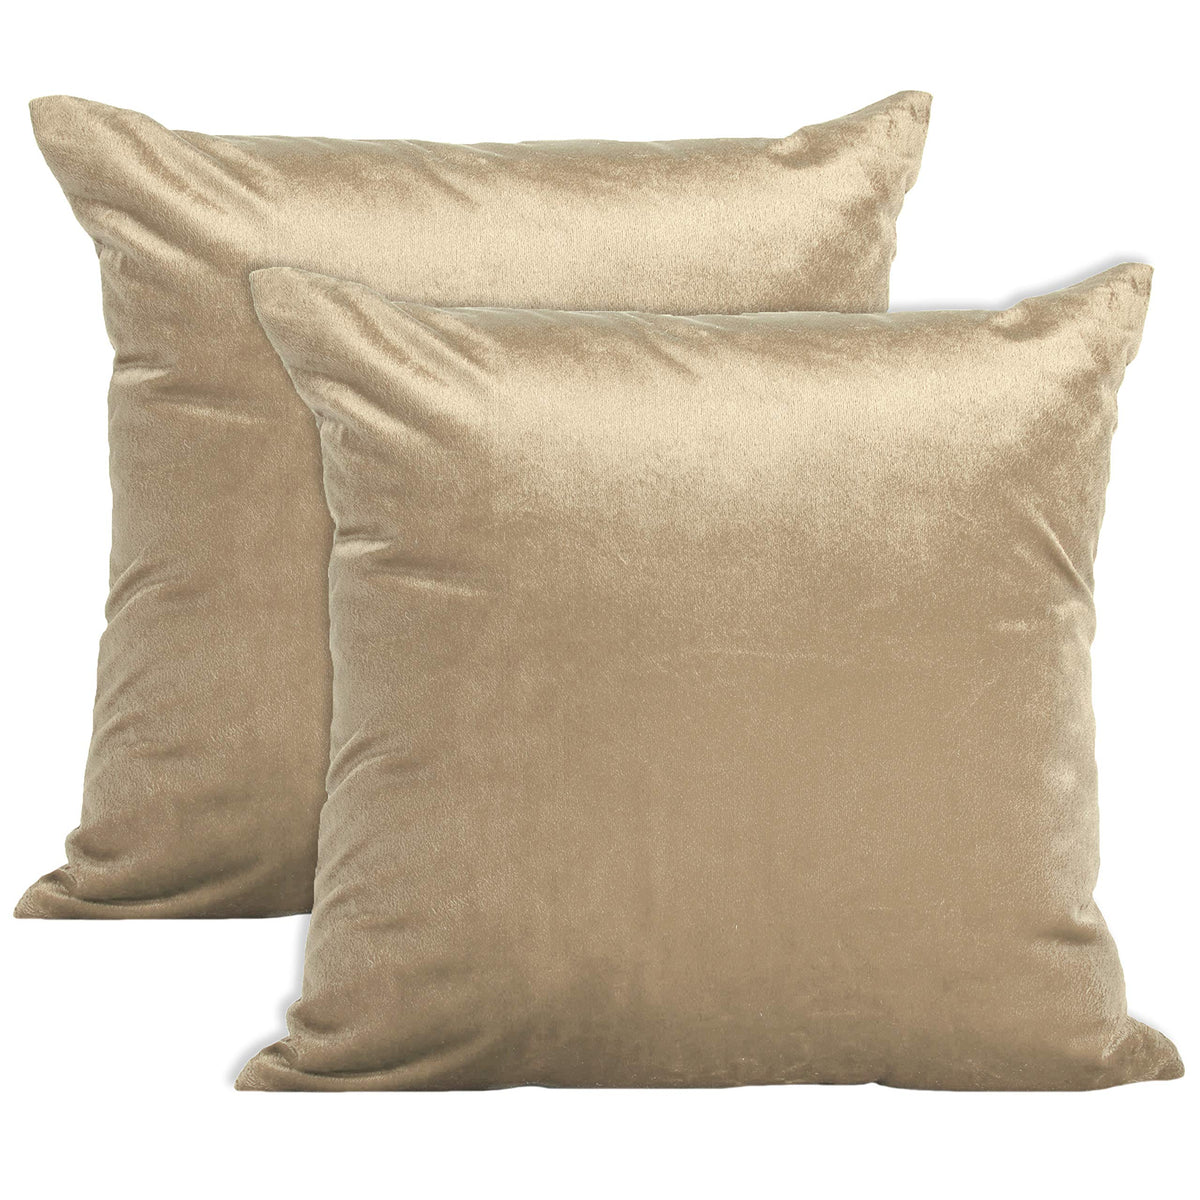 Encasa Homes Velvet Throw Pillow Cushion Covers 2 pc Set - Cream - 16 x 16 inch / 40 x 40 cm Solid Plain Dyed Soft & Smooth, Square Accent Decorative Pillowcase for Couch, Sofa, Chair, Bed & Home